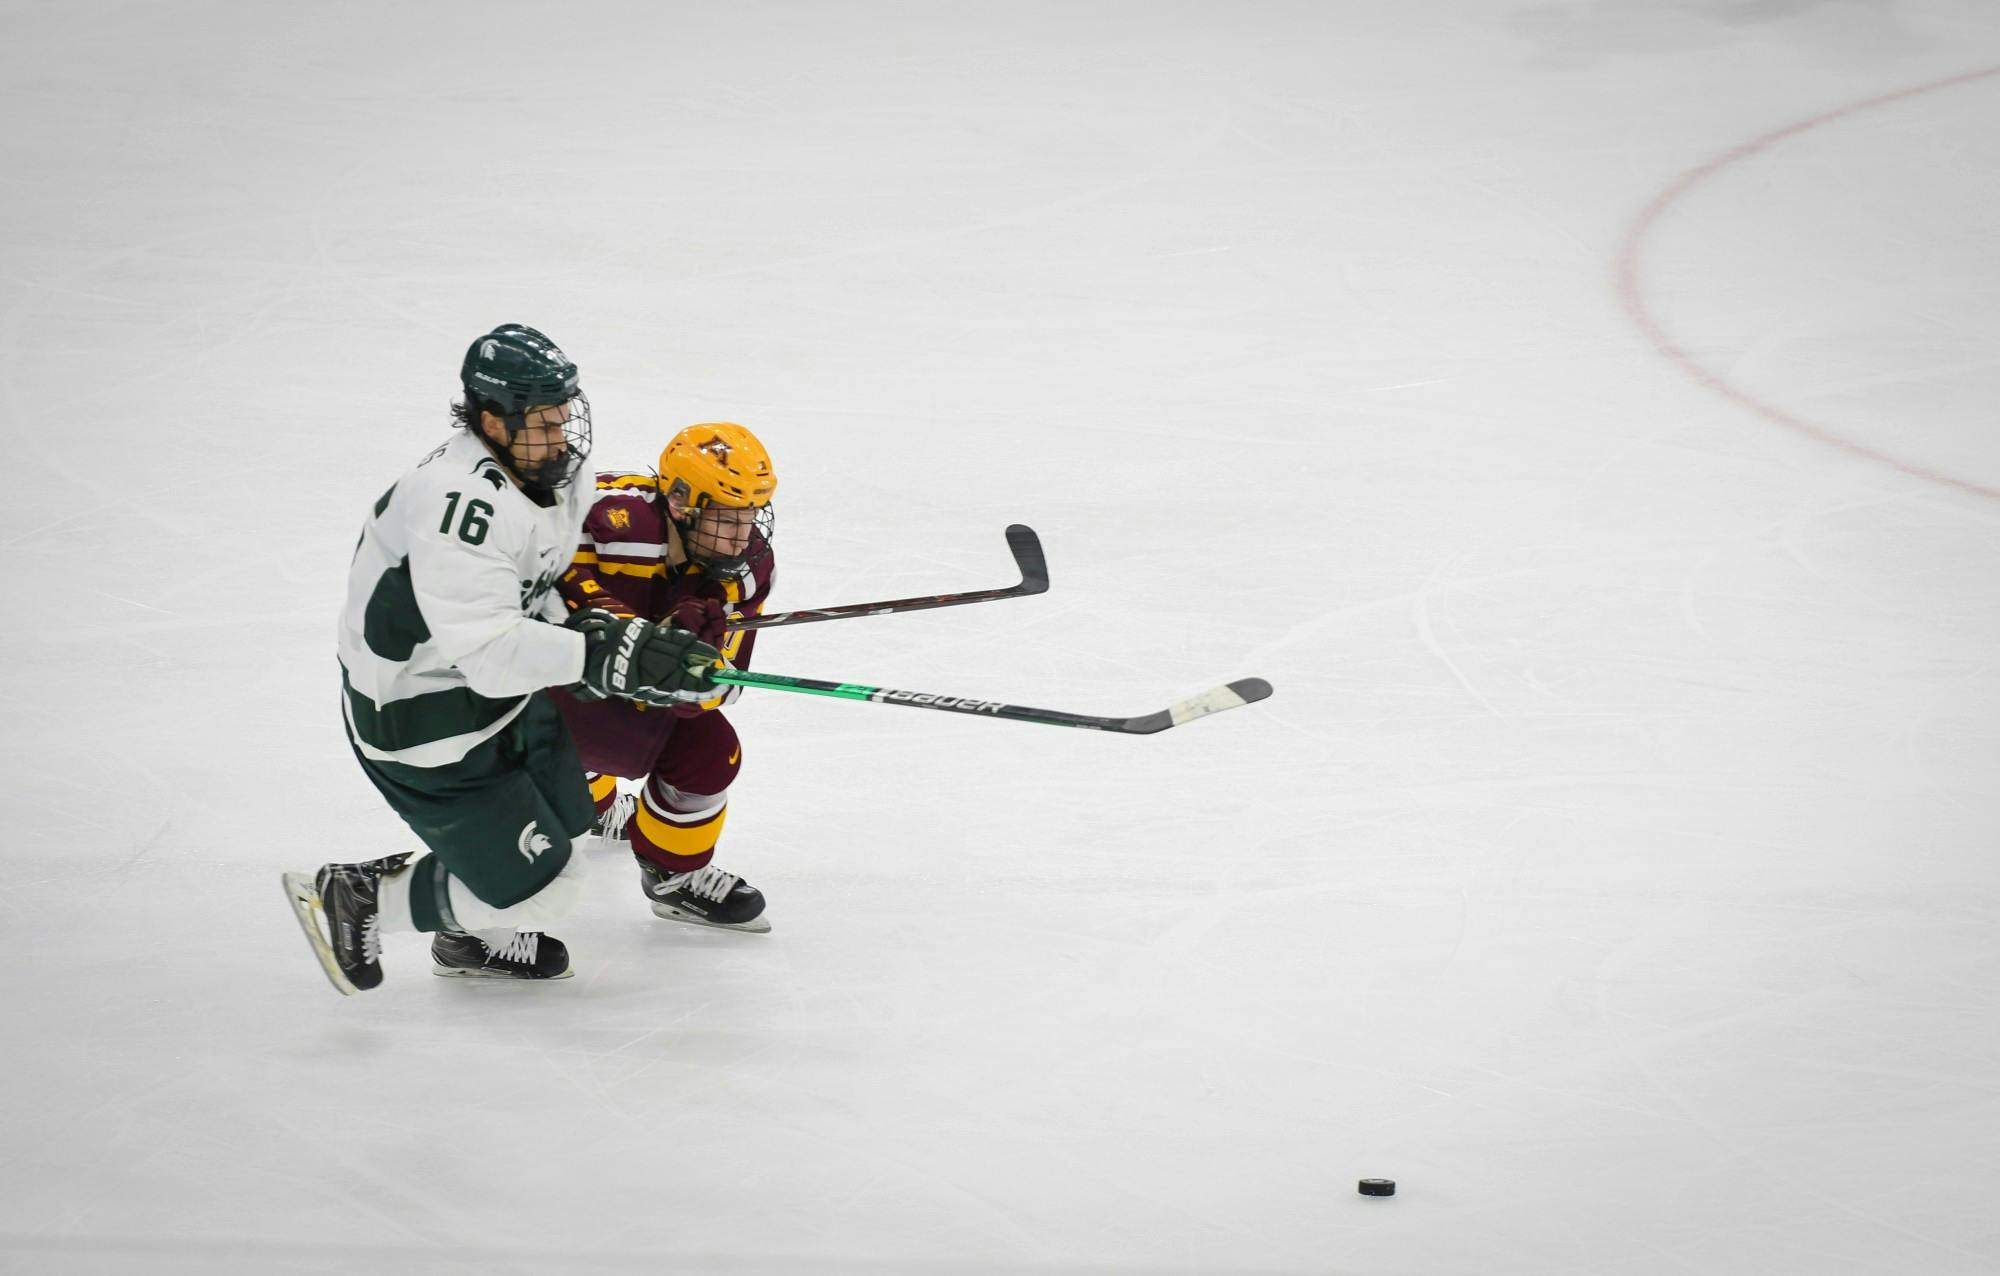 <p>Junior forward Brody Stevens (16) fights for the puck during the hockey game against Minnesota at the Munn Ice Arena on Jan. 10. The Spartans defeated the Golden Gophers 4-1. </p>